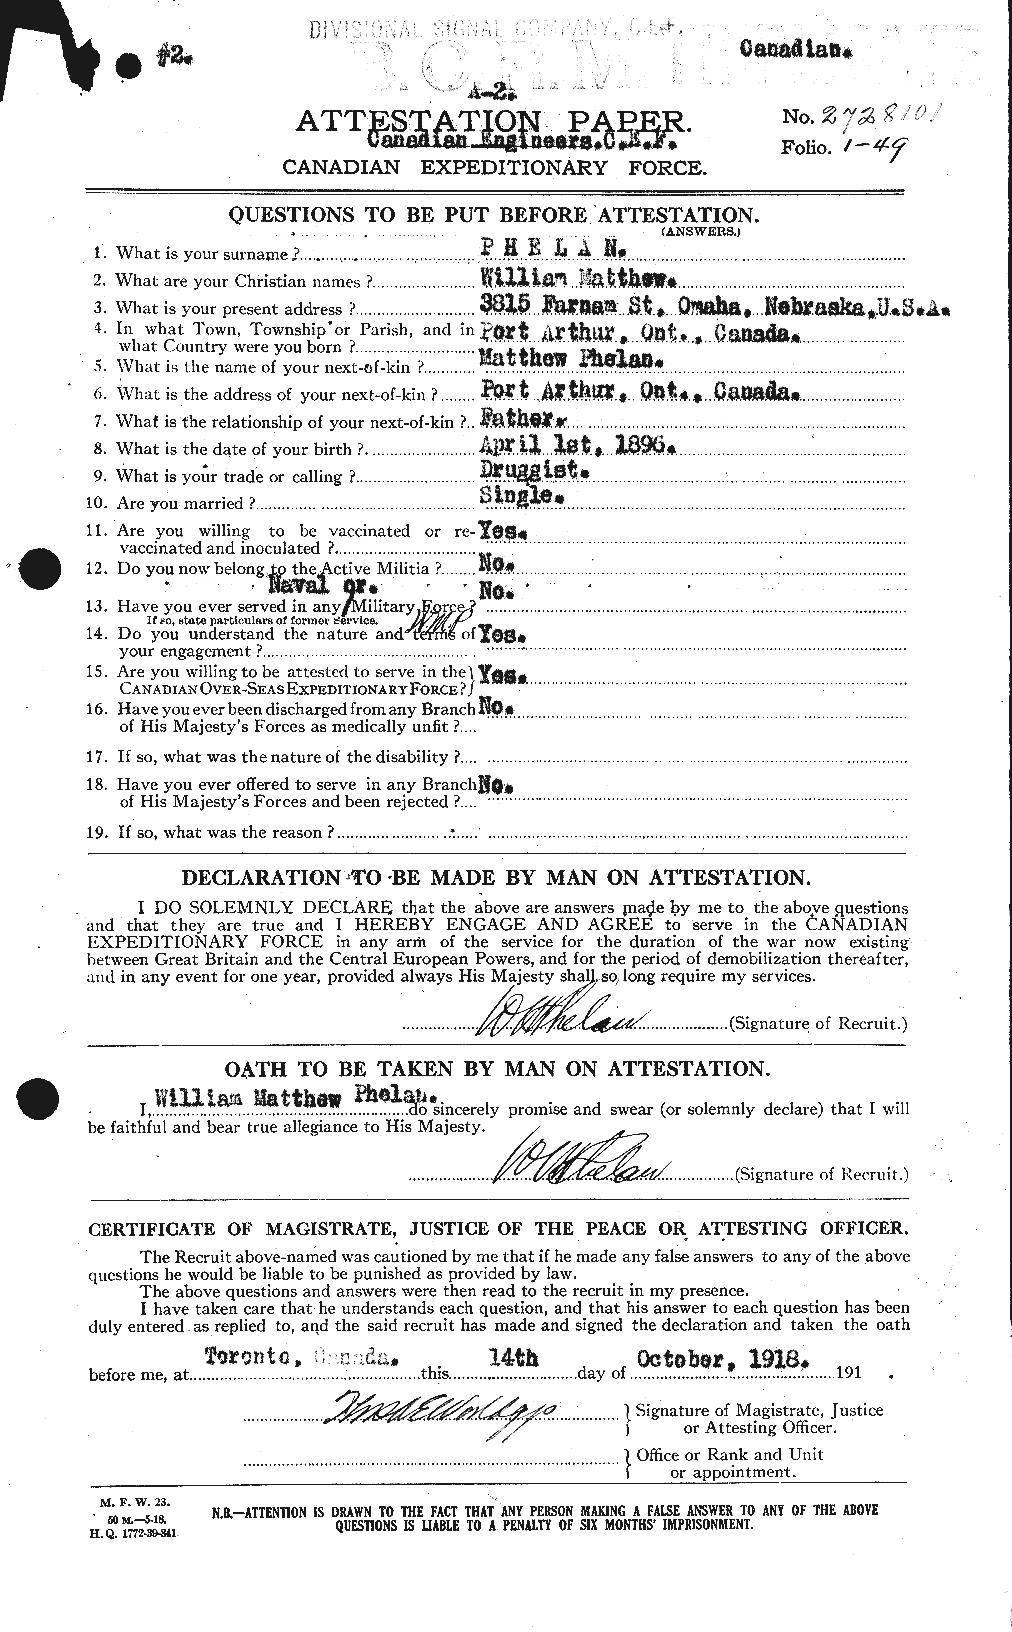 Personnel Records of the First World War - CEF 576977a